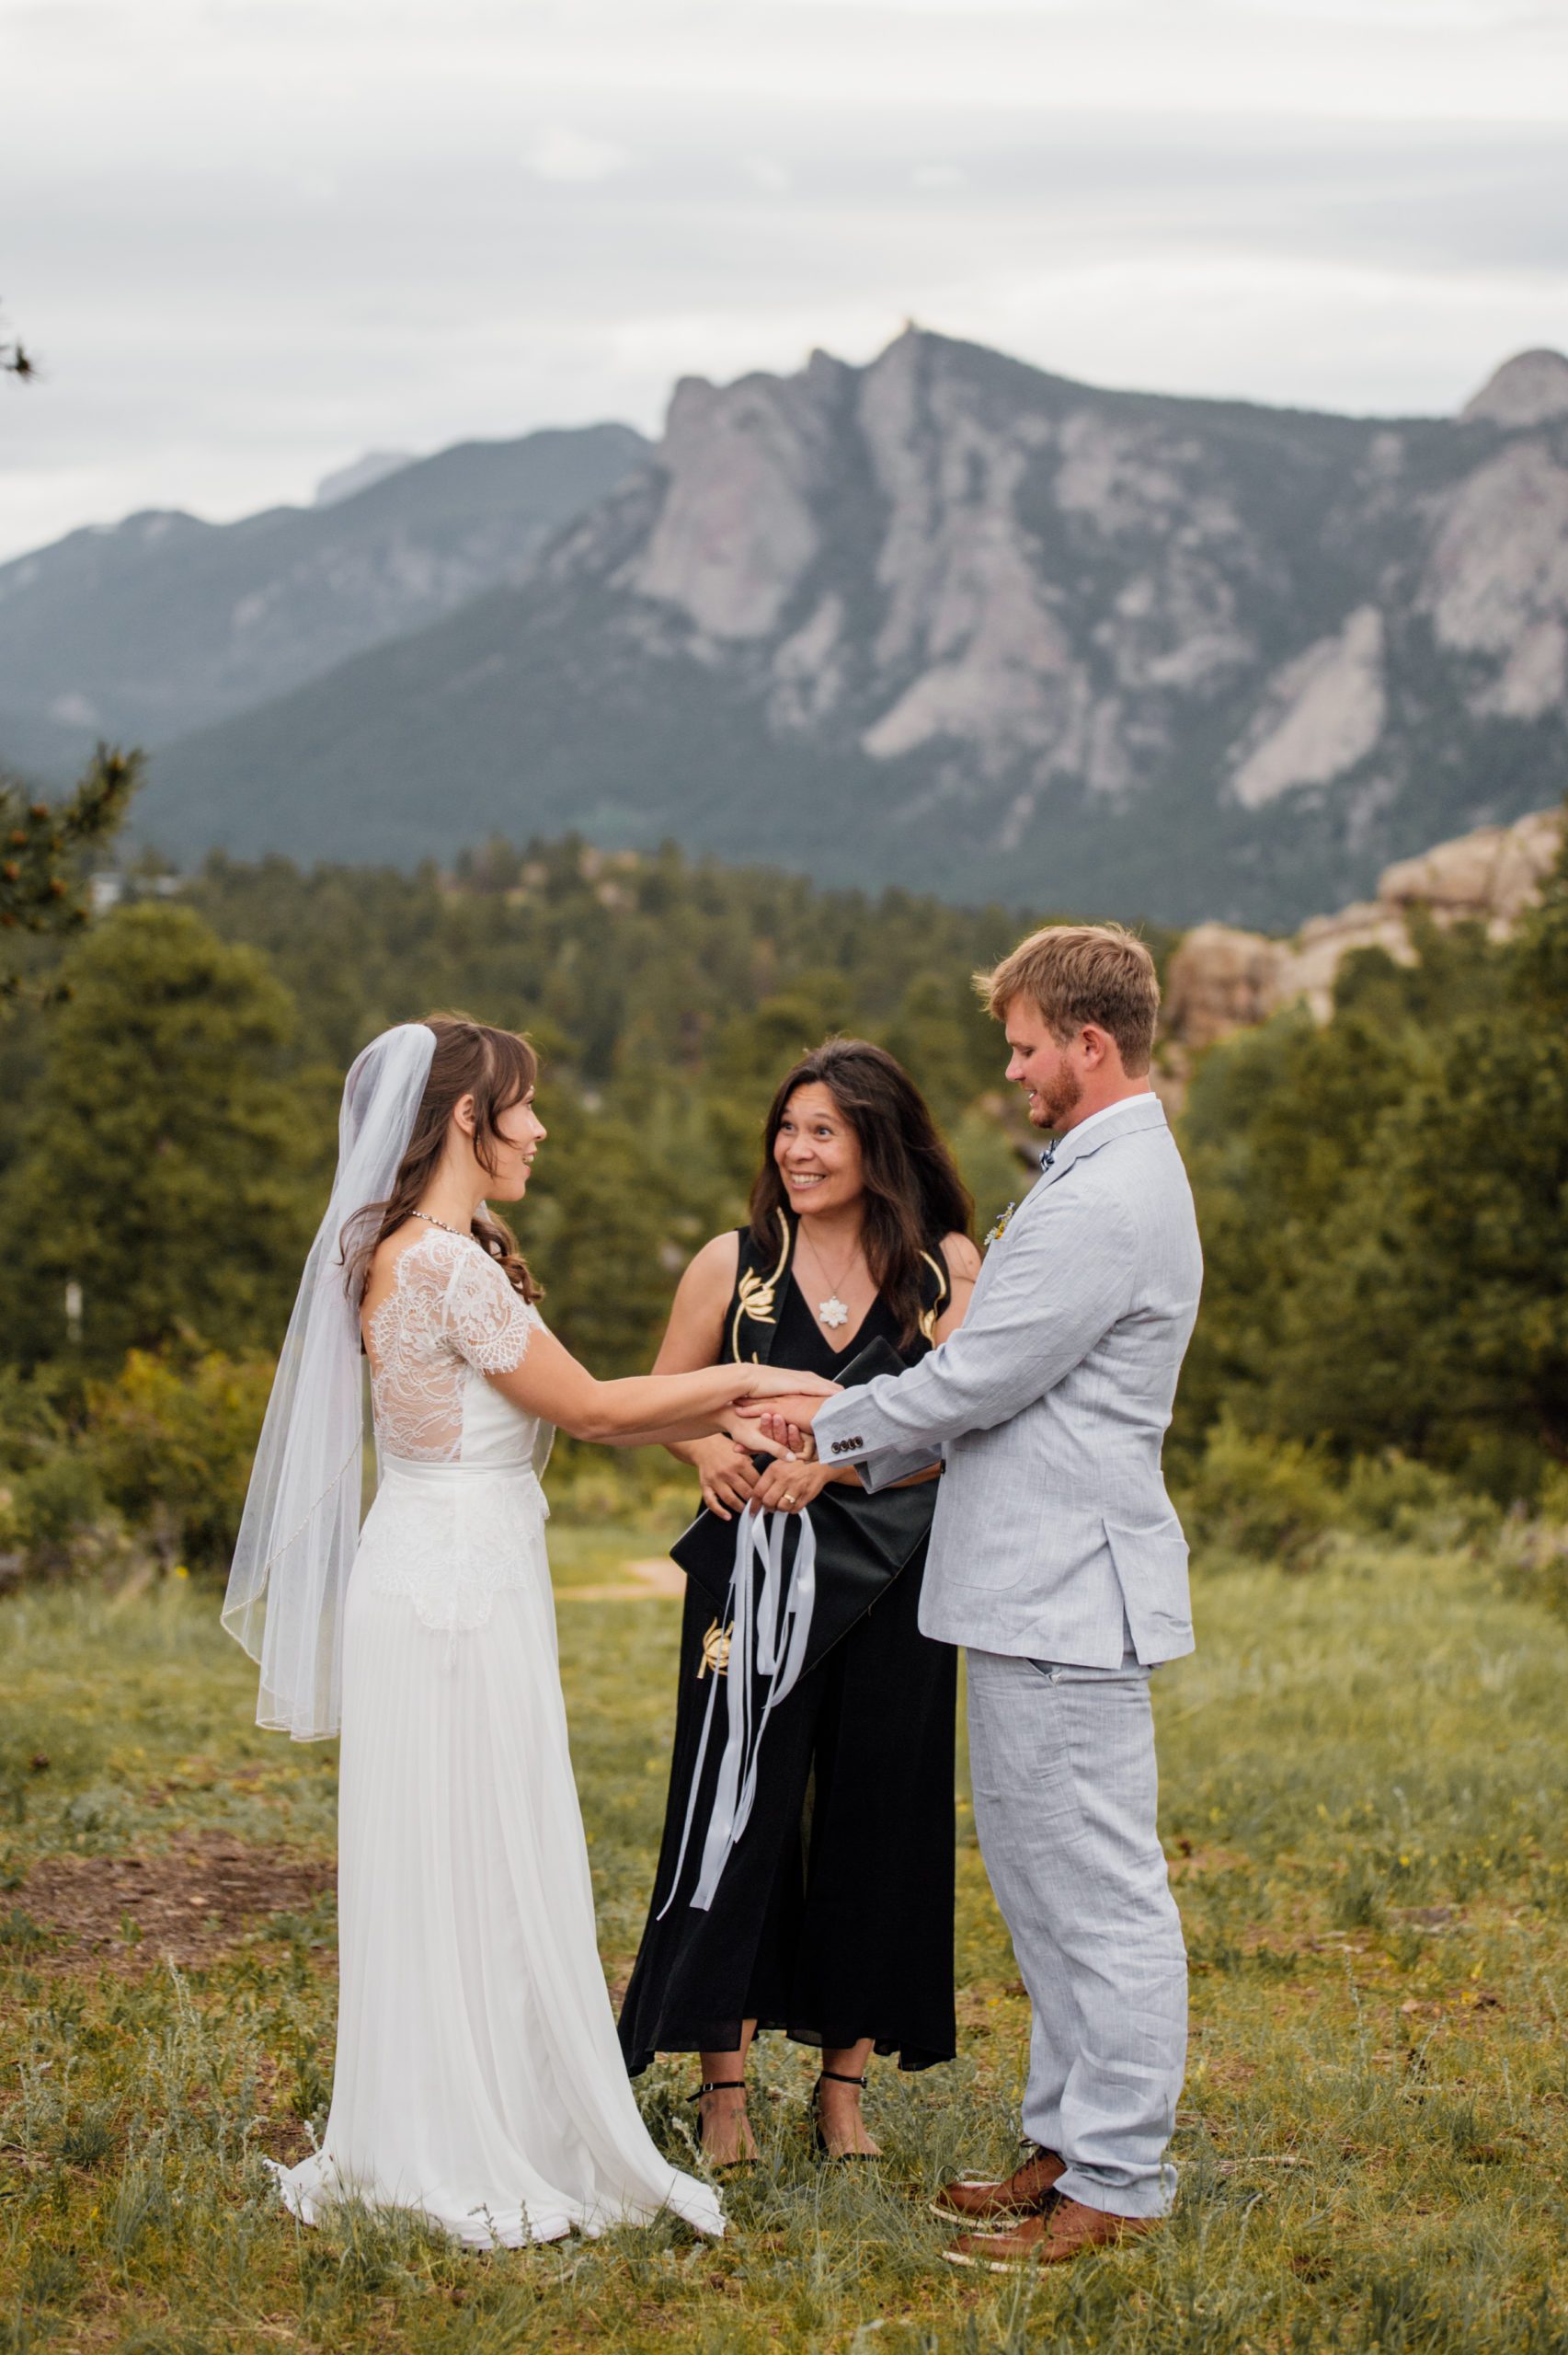 The bride and groom hold hands during their hand-fasting ceremony at Knoll Willows for their elopement in Estes Park.